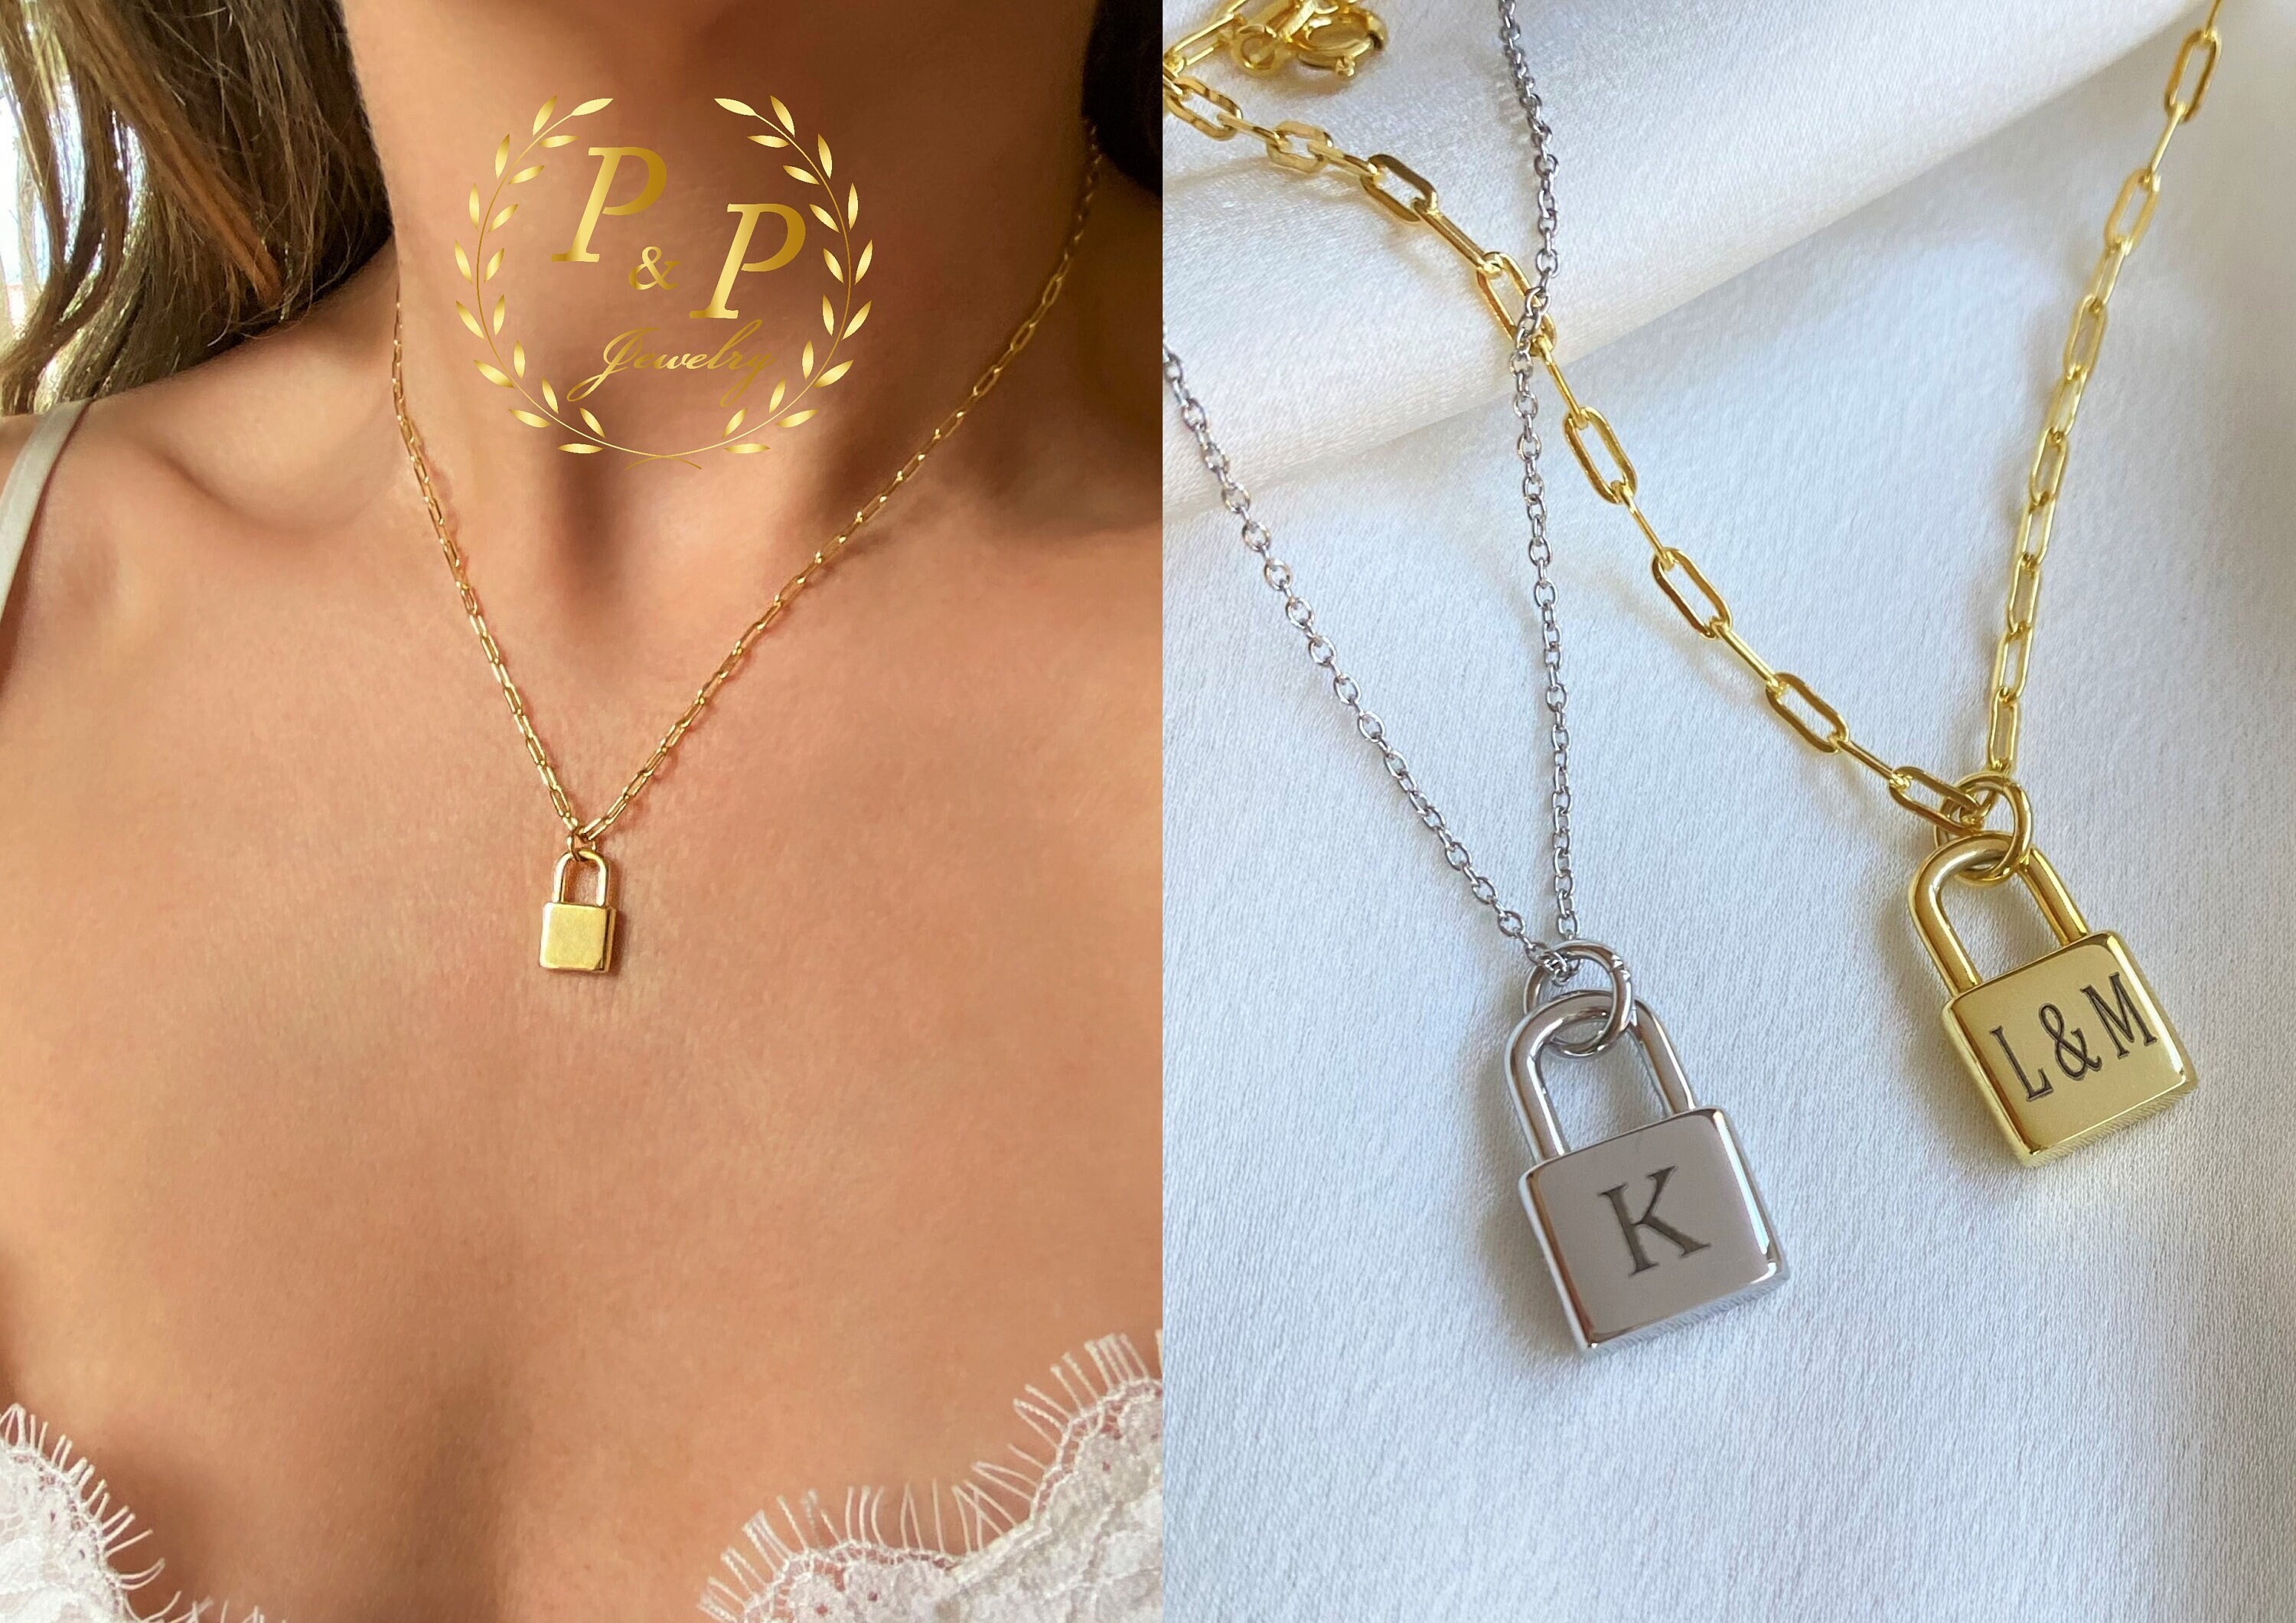 Fashion Gold Lock And Key Necklace Meaning Women Wholesale N209234 - Buy  Lock And Key Necklace Meaning,Cross Necklace,Gold Necklace Product on